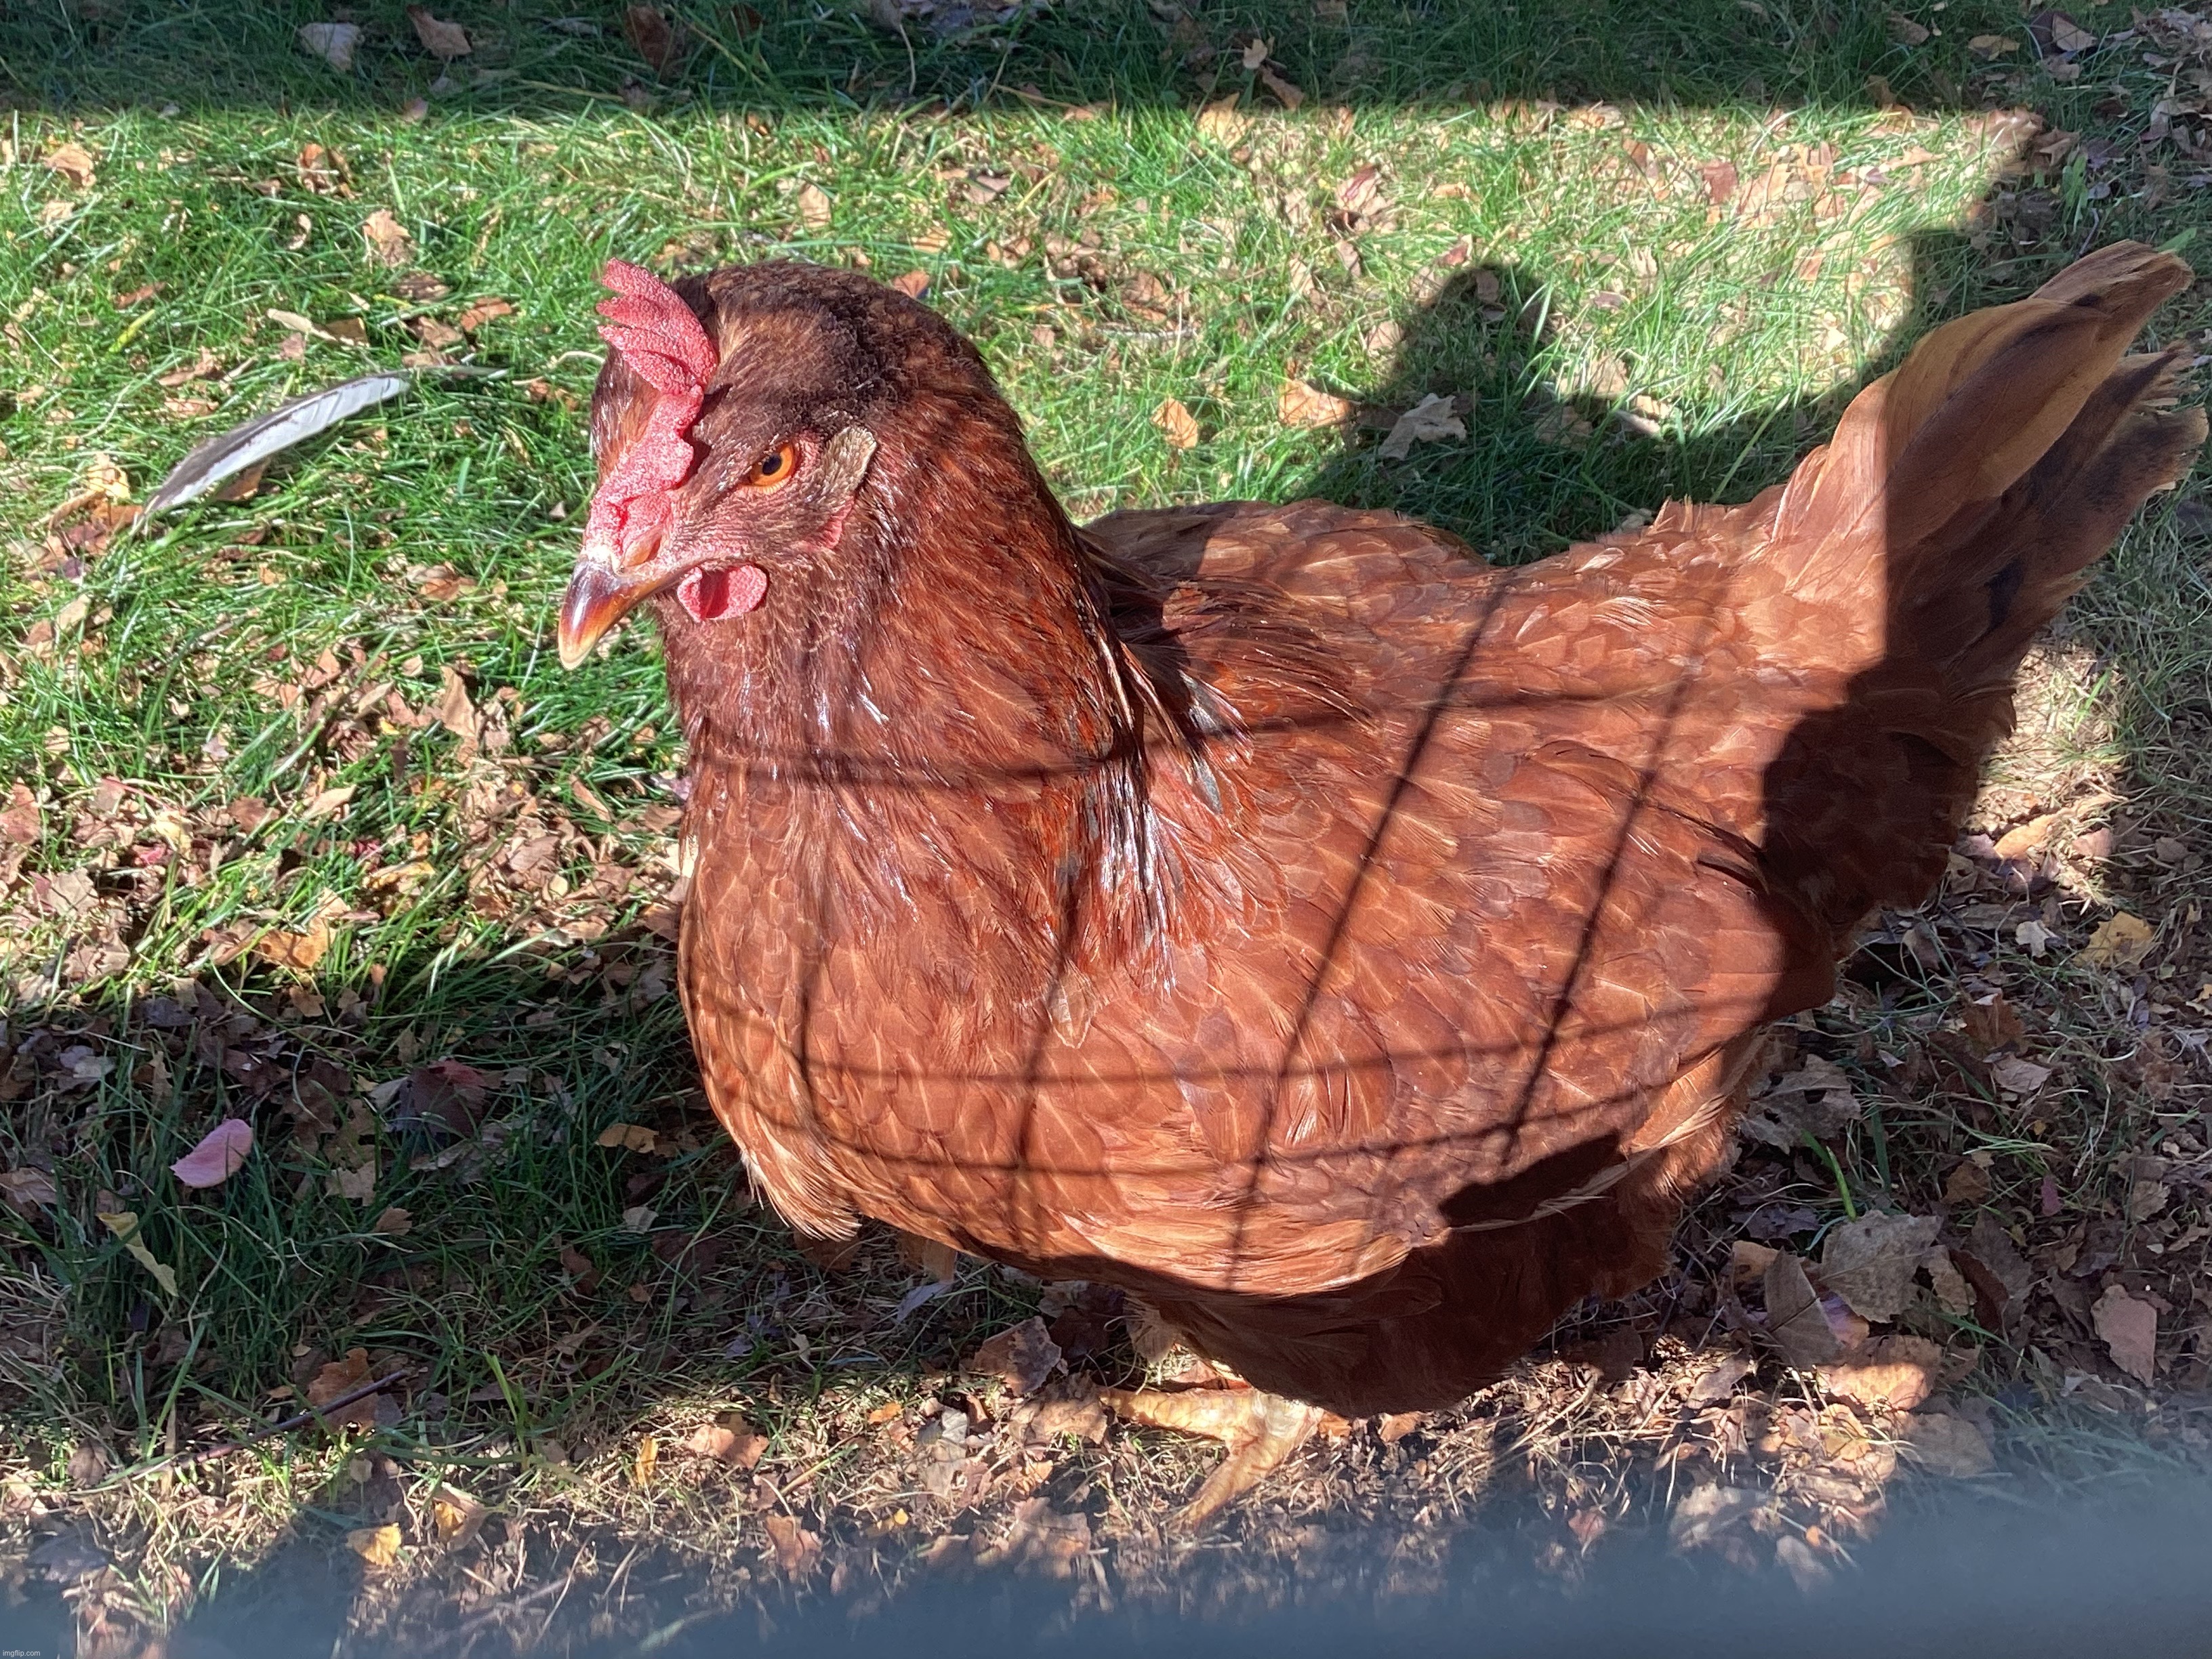 Evil chicken | image tagged in share your own photos | made w/ Imgflip meme maker